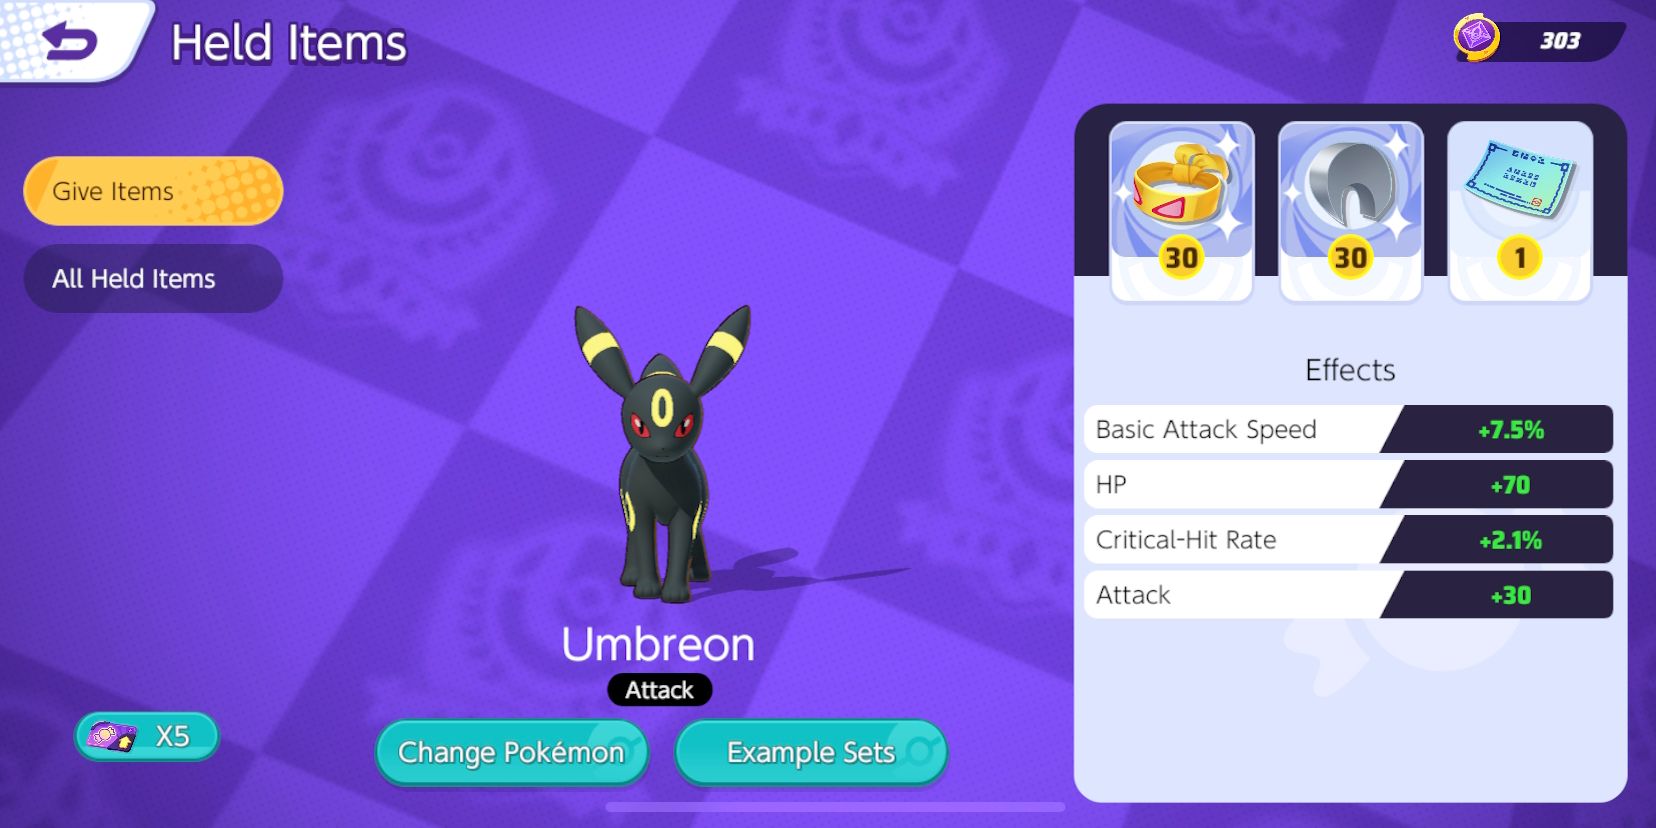 Umbreon saved item selection screen with Muscle Band, Razor Claw, and Weakness Policy chosen